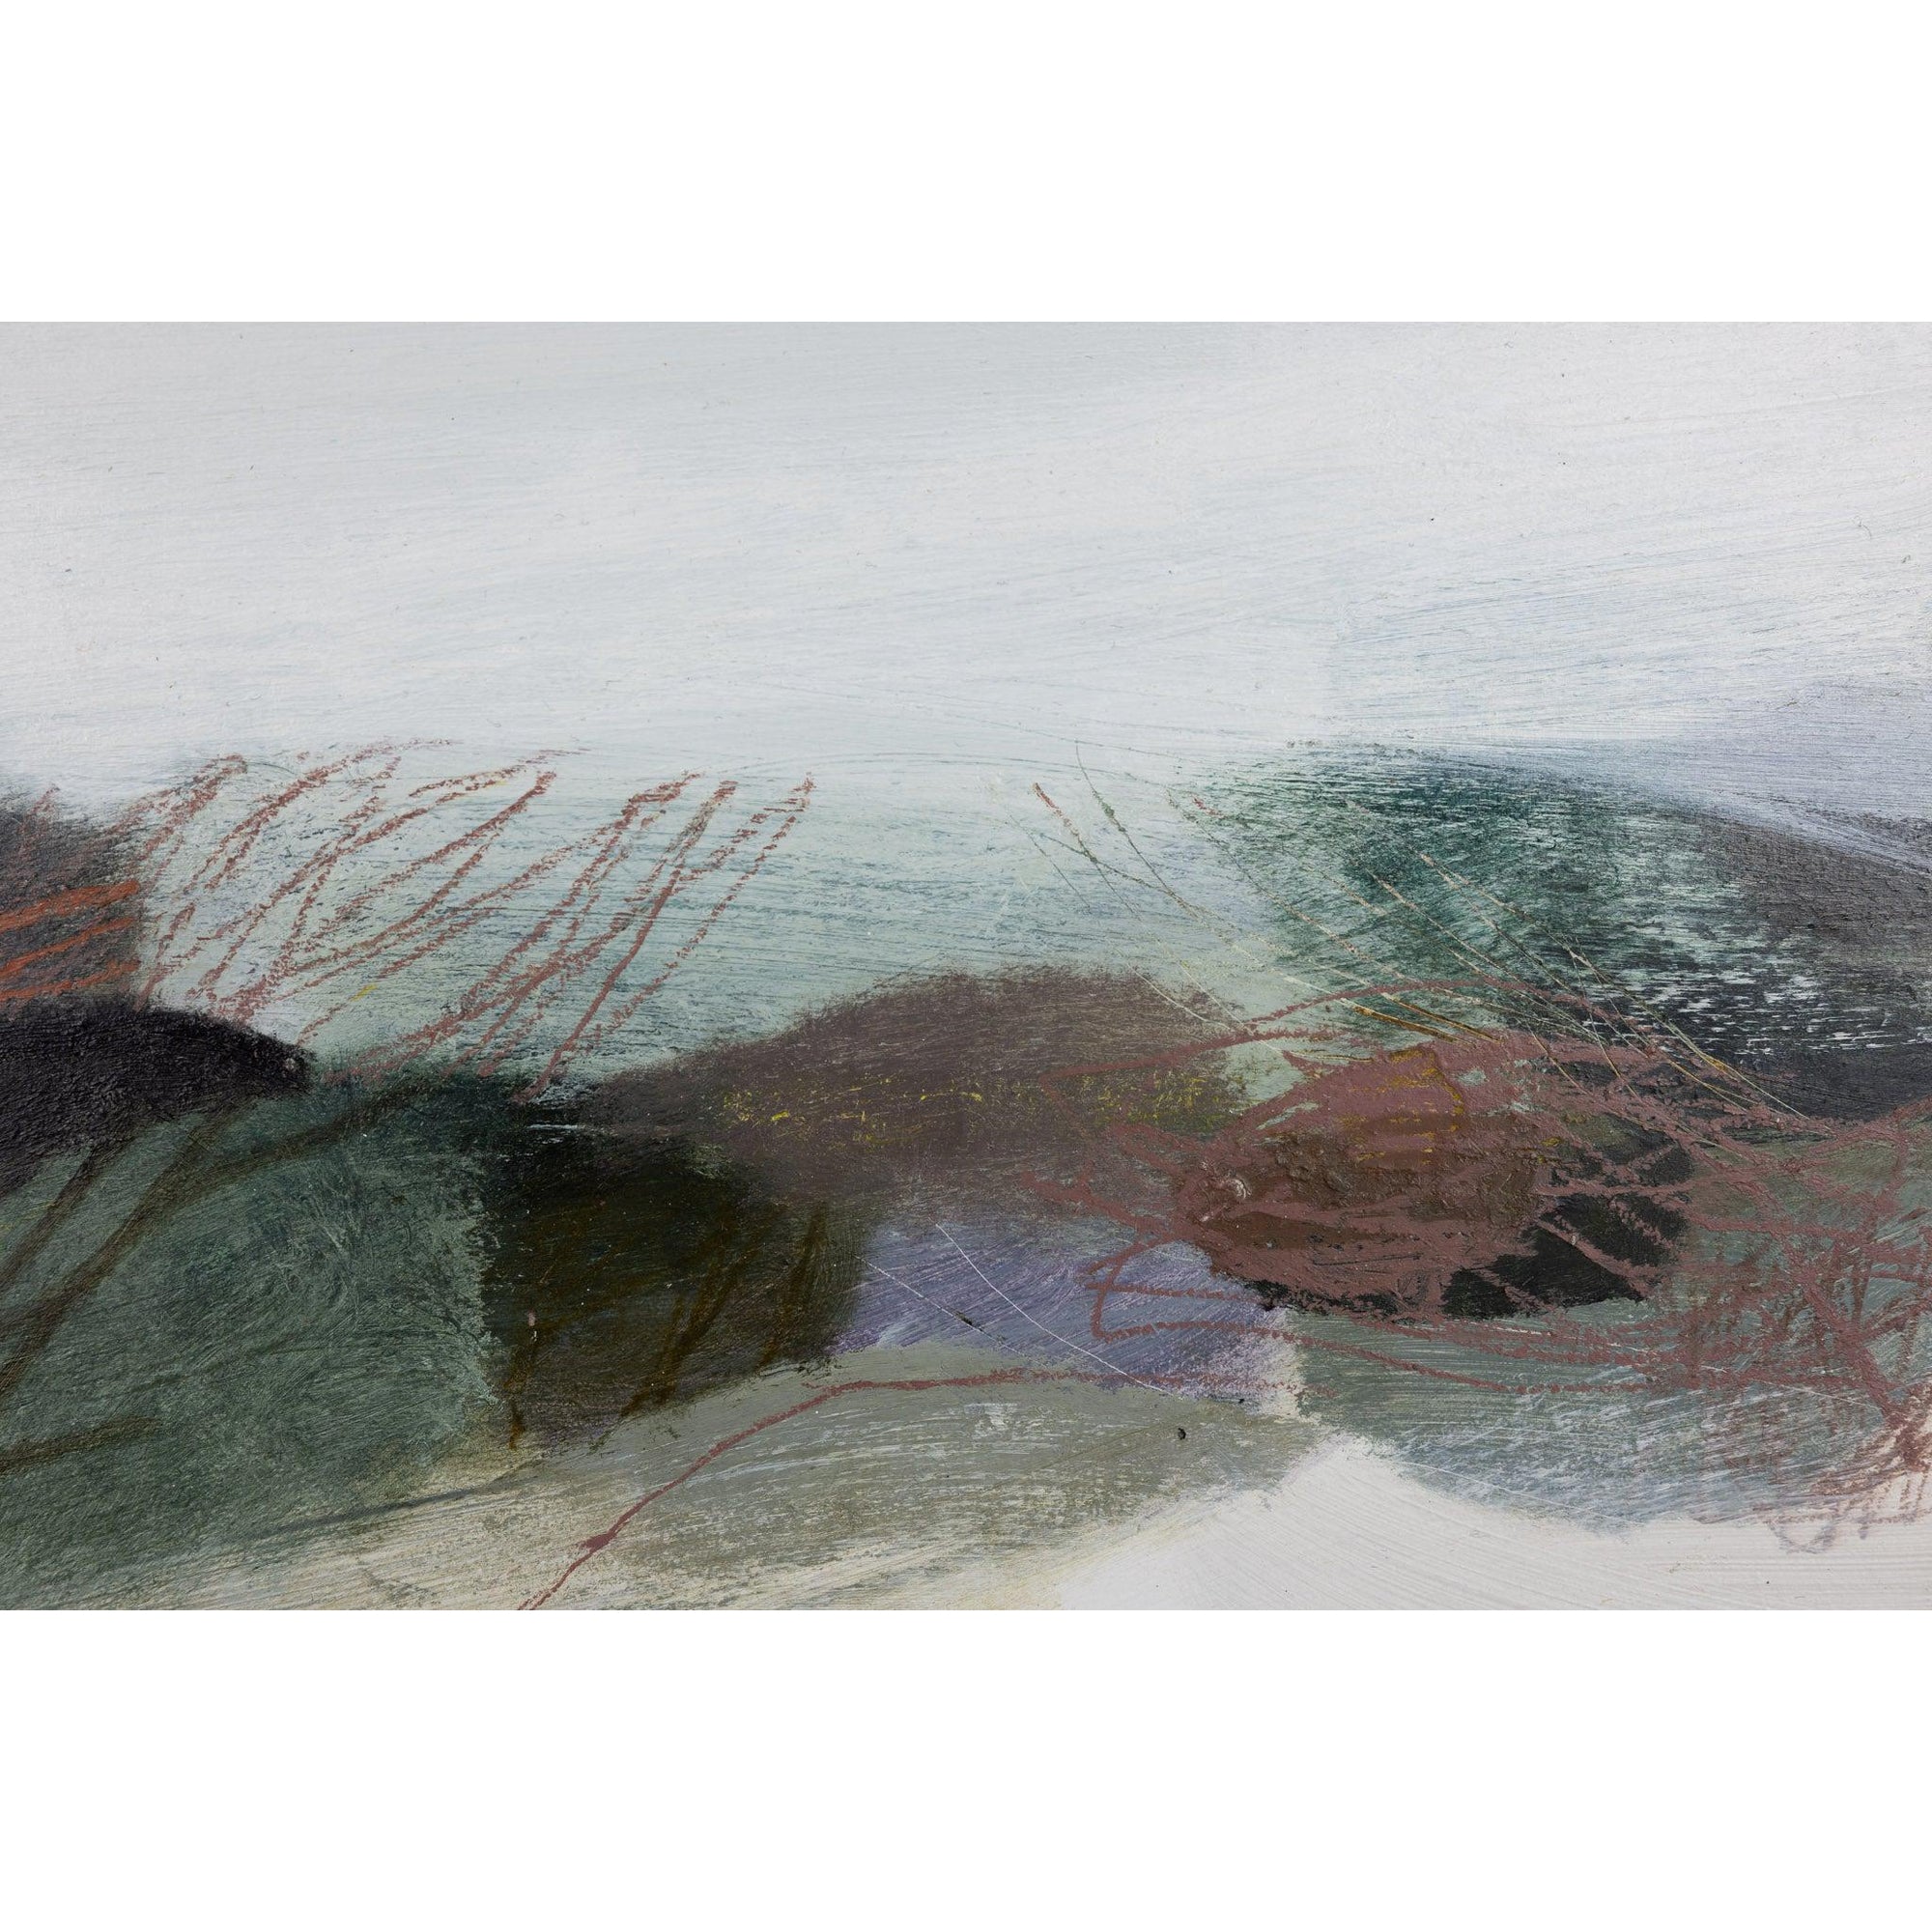 Shifting Colours 2, mixed media by Karen Birchwood, available from Padstow Gallery, Cornwall